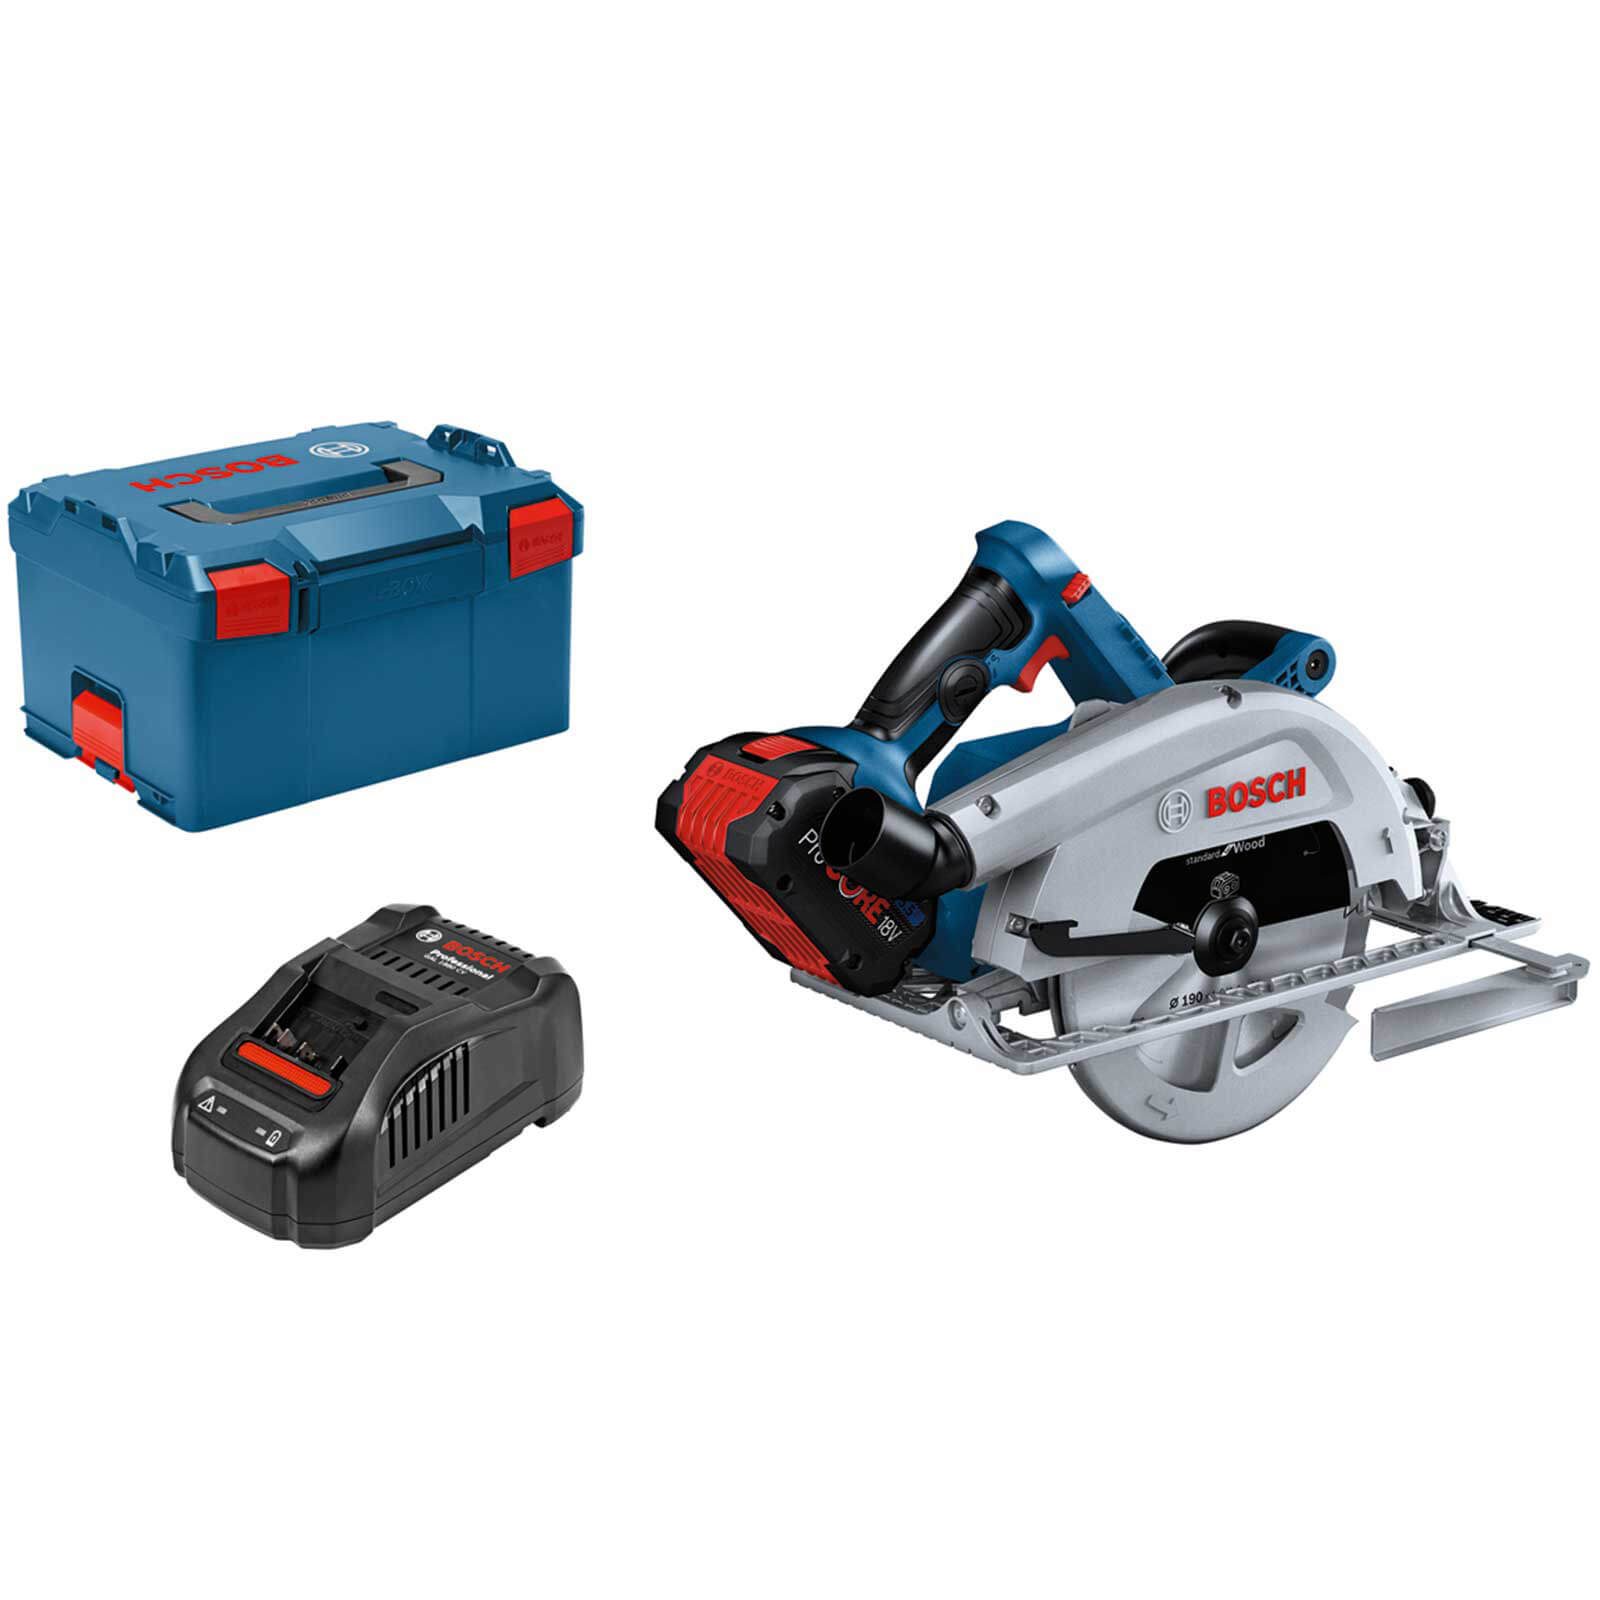 Image of Bosch GKS 18V-68 C BITURBO 18v Brushless Connected Circular Saw 190mm 1 x 5.5ah Li-ion ProCore Charger Case